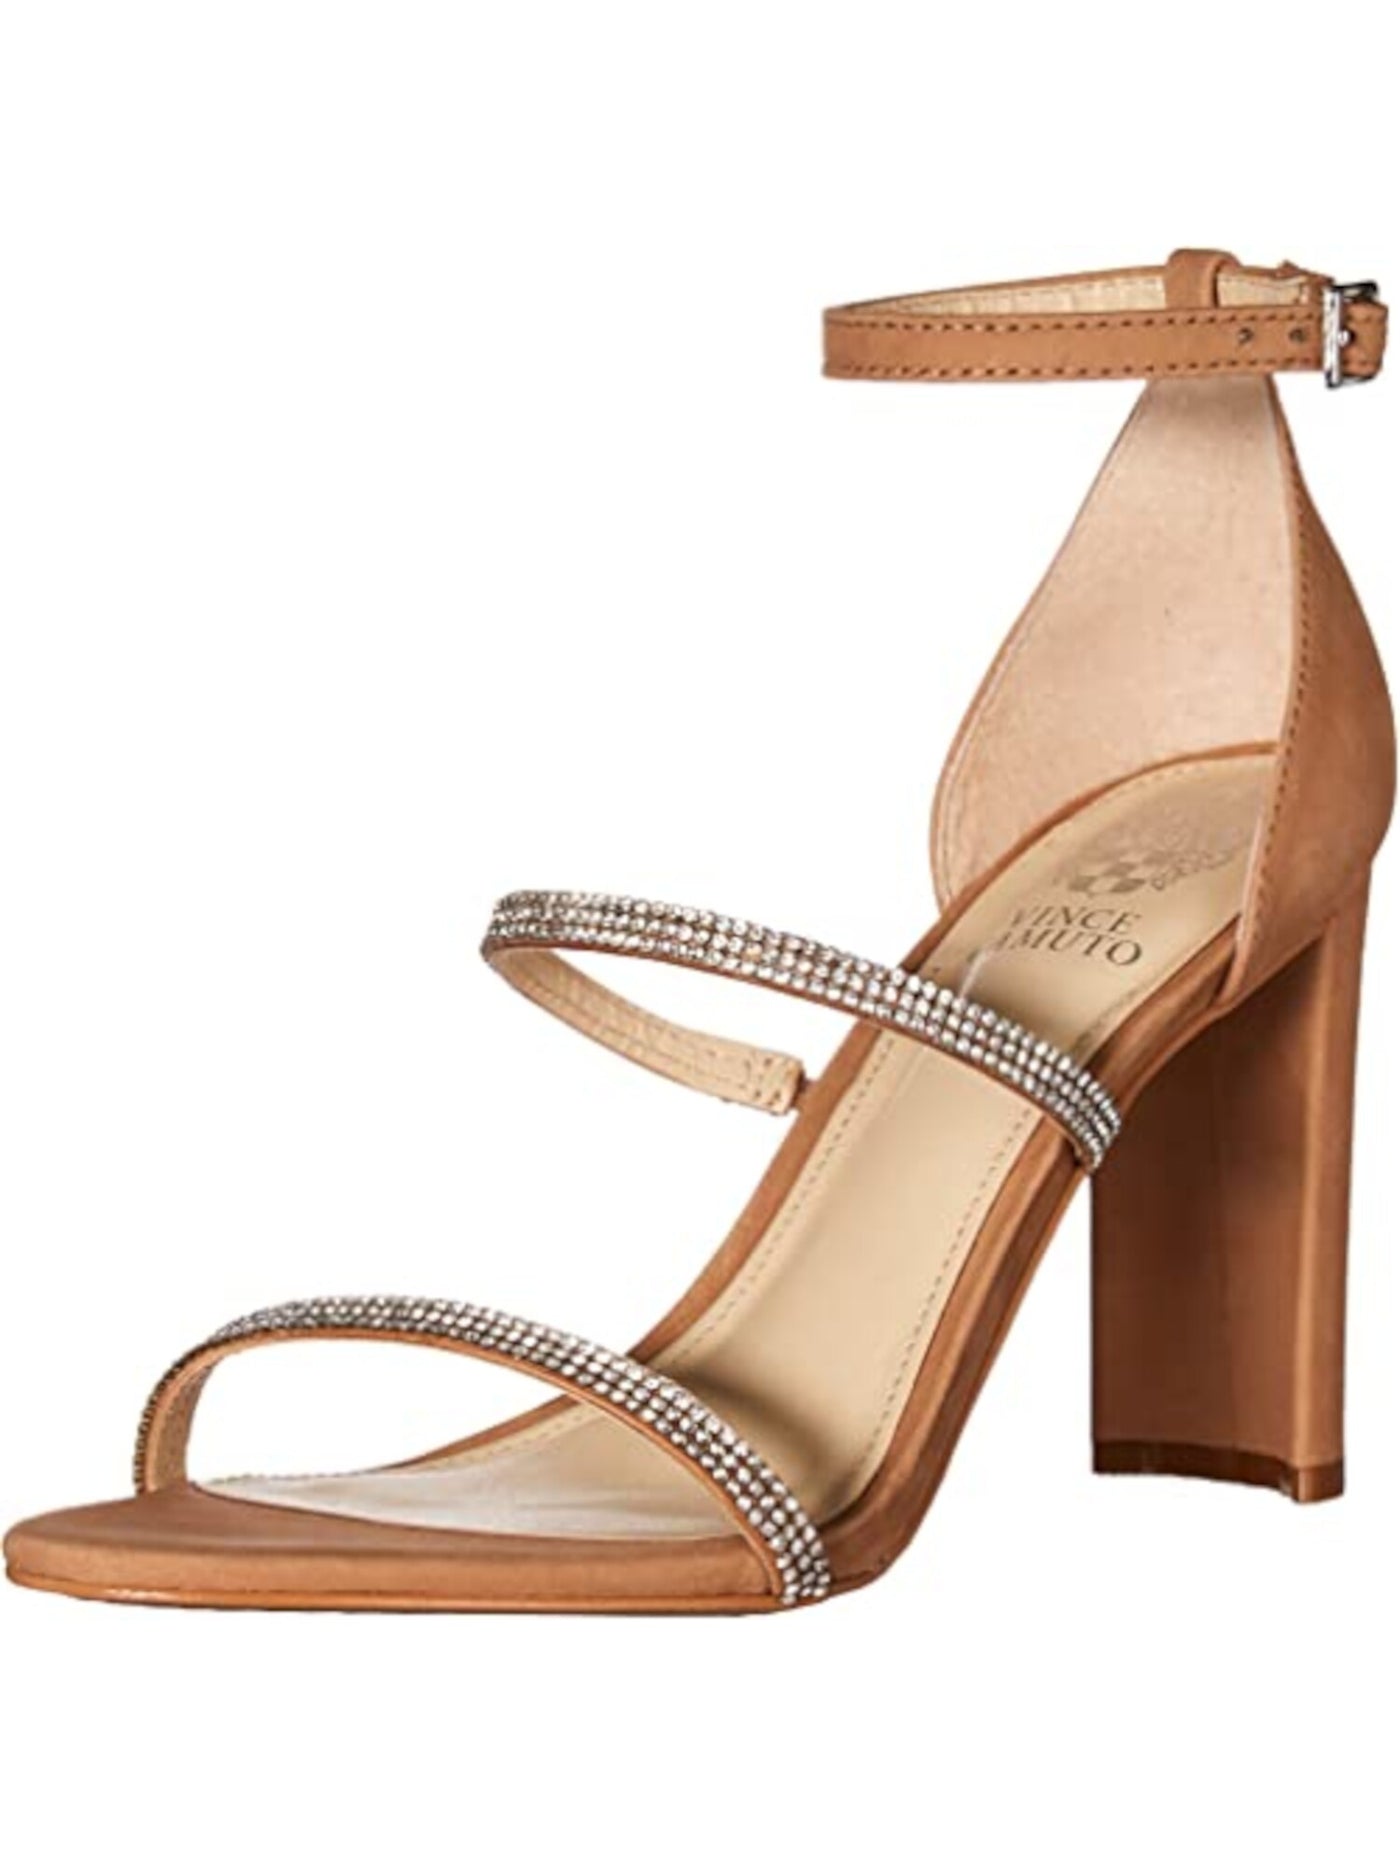 VINCE CAMUTO Womens Beige Ankle Strap Cushioned Rhinestone Fairah Almond Toe Block Heel Buckle Leather Dress Sandals Shoes 6.5 M